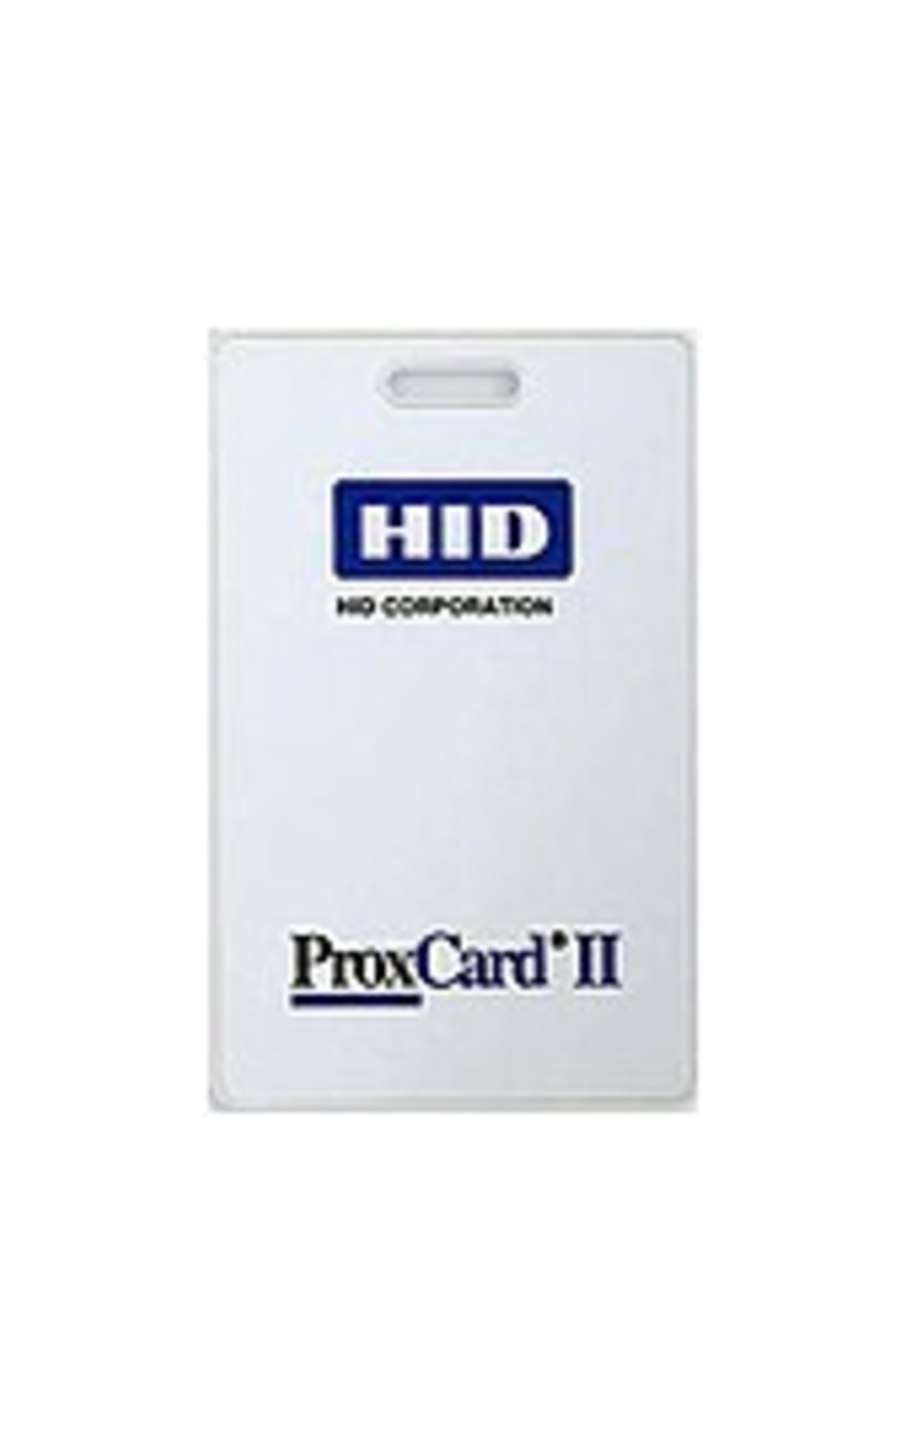 HID Direct Image 20 mil Glossy Label - 3.37" Width x 2.12" Length